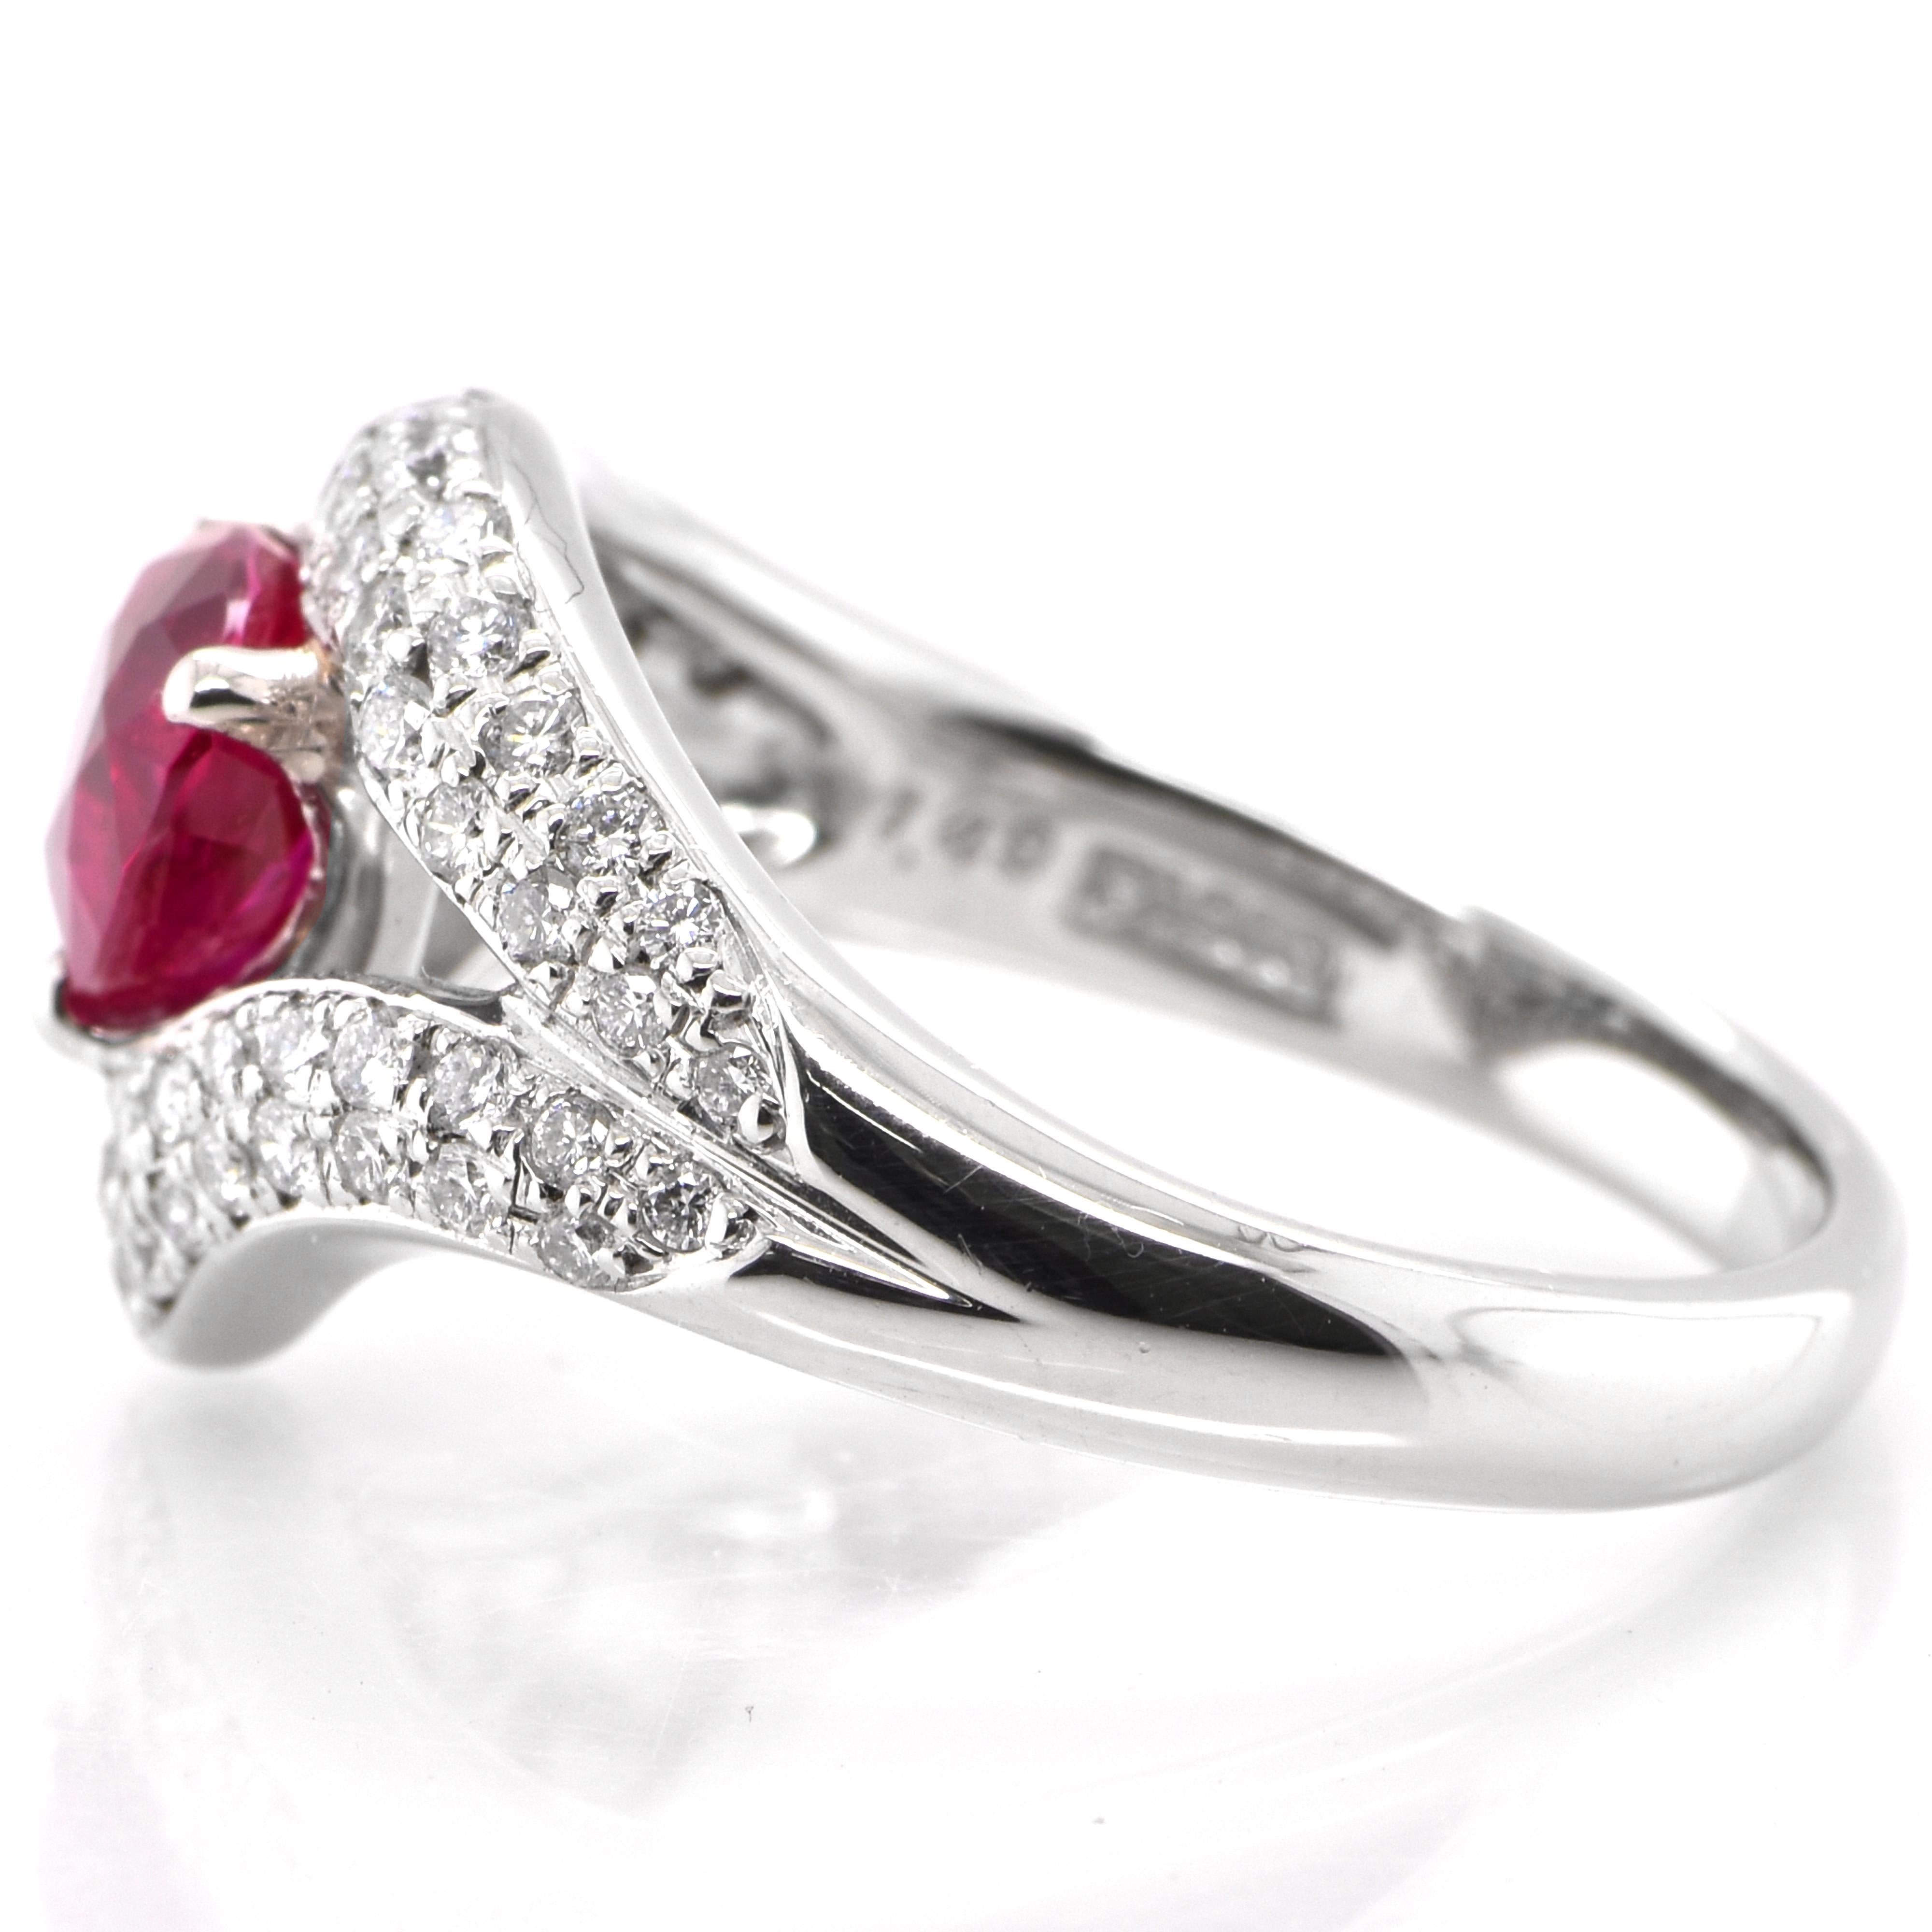 Trillion Cut GIA Certified 1.49 Carat Natural Burmese Ruby and Diamond Ring set in Platinum For Sale